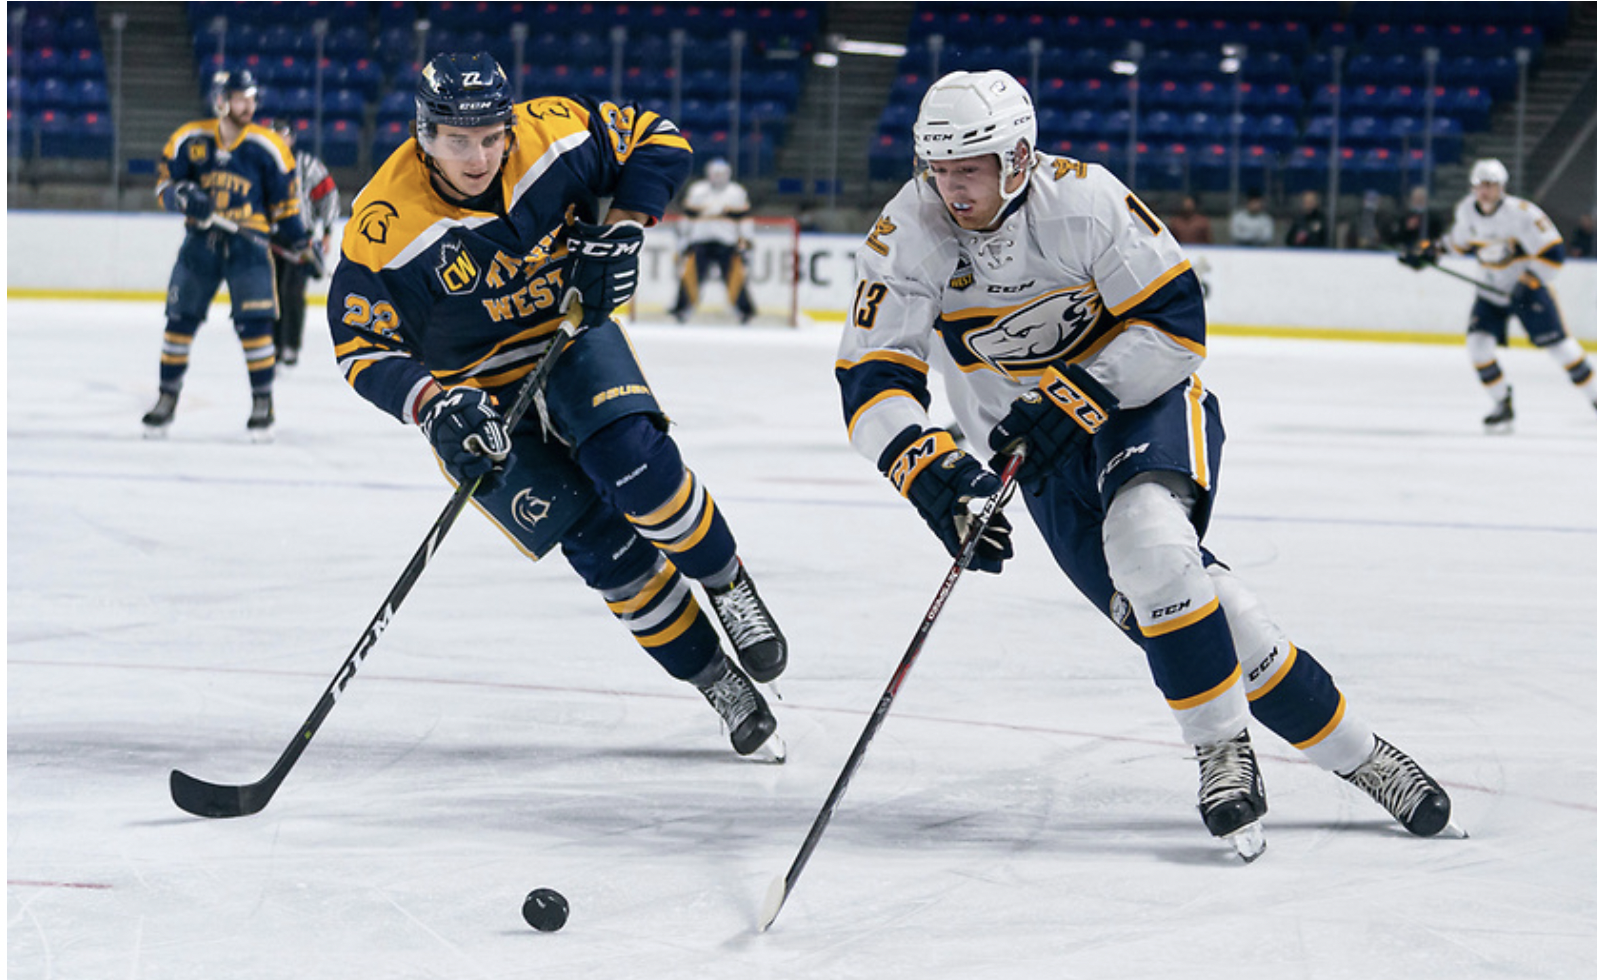 UBC Thunderbirds v TWU in finals of the Captains' Cup hockey action at UBC in Vancouver, BC, October, 9, 2021. (Rich Lam/UBC Athletics Photo)